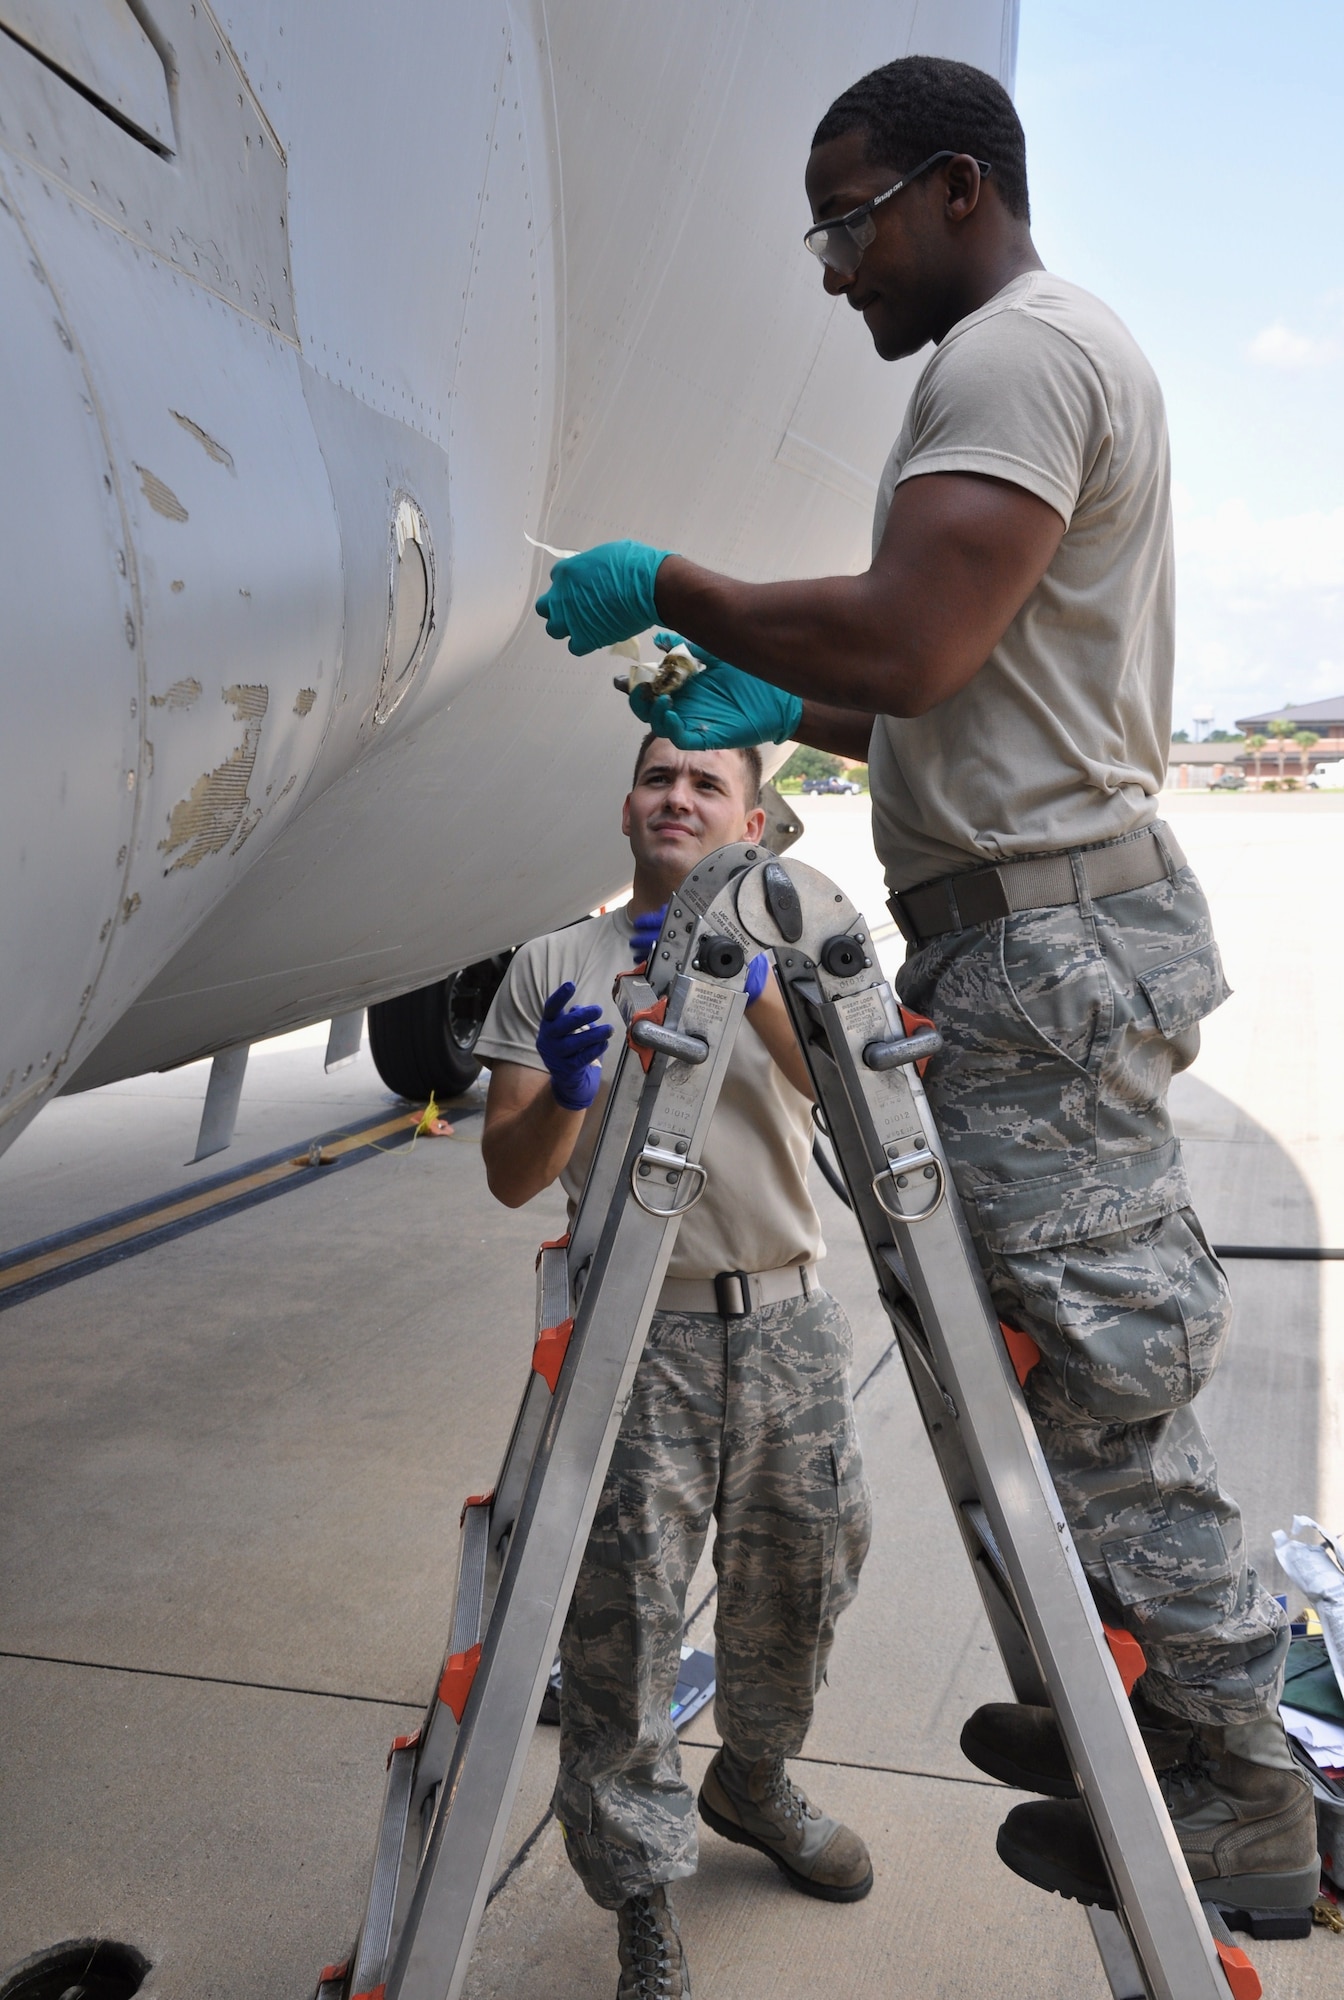 Senior Airman Steven A. Brown and Airman 1st Class Daniel N. Torrio remove tape from around a taxi light on a C-17 Globemaster III Aug. 3, 2010, at Charleston Air Force Base, S.C. Airman Brown is a crew chief with the 315th Aircraft Maintenance Squadron here and Airman Torrio is a crew chief with the 437th Aircraft Maintenance Squadron here. (U.S. Air Force photo/Staff Sgt. Shane Ellis)